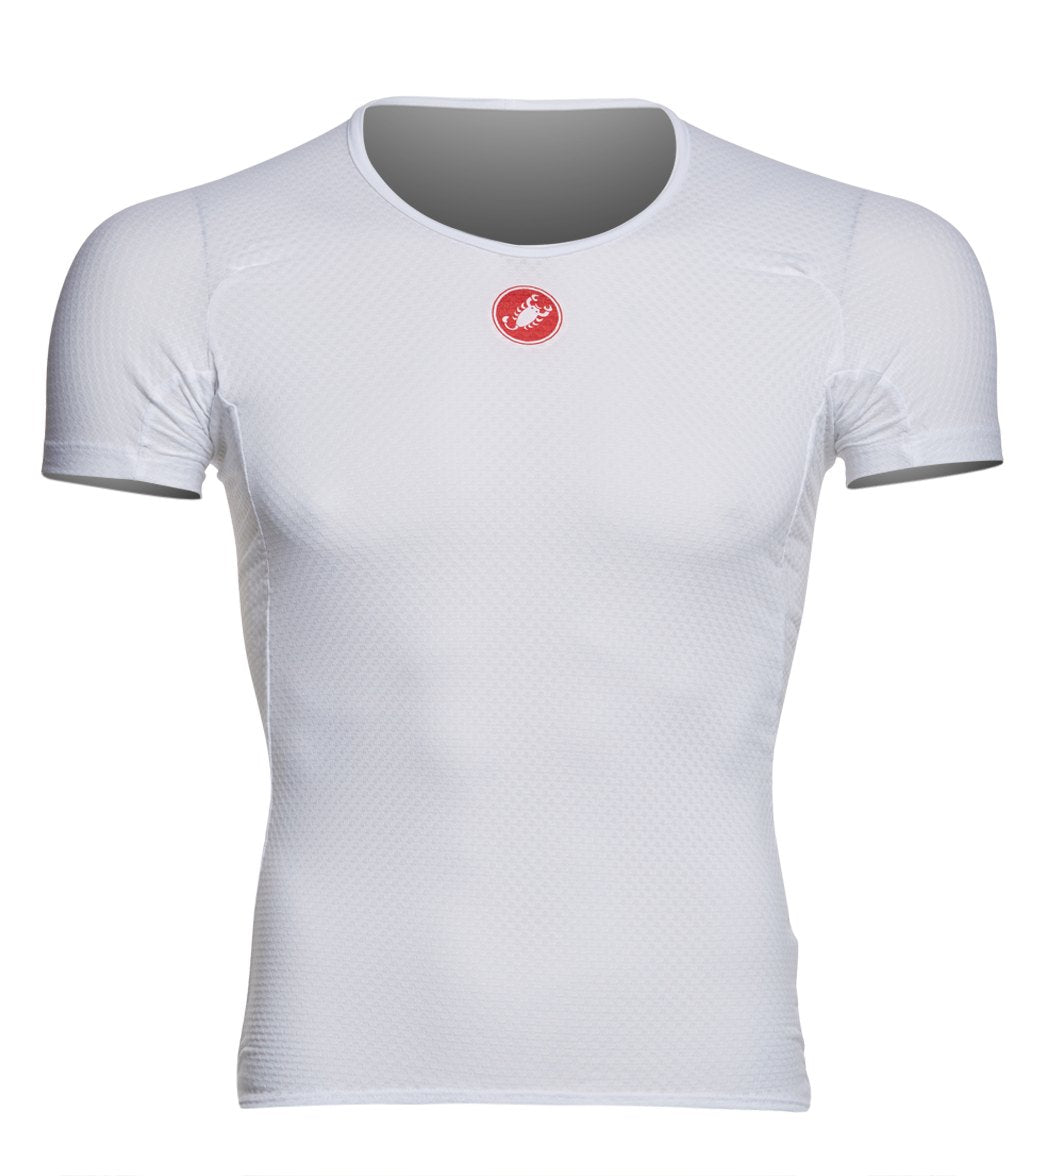 Castelli Men's Pro Issue Short Sleeve Base Layer at SwimOutlet.com